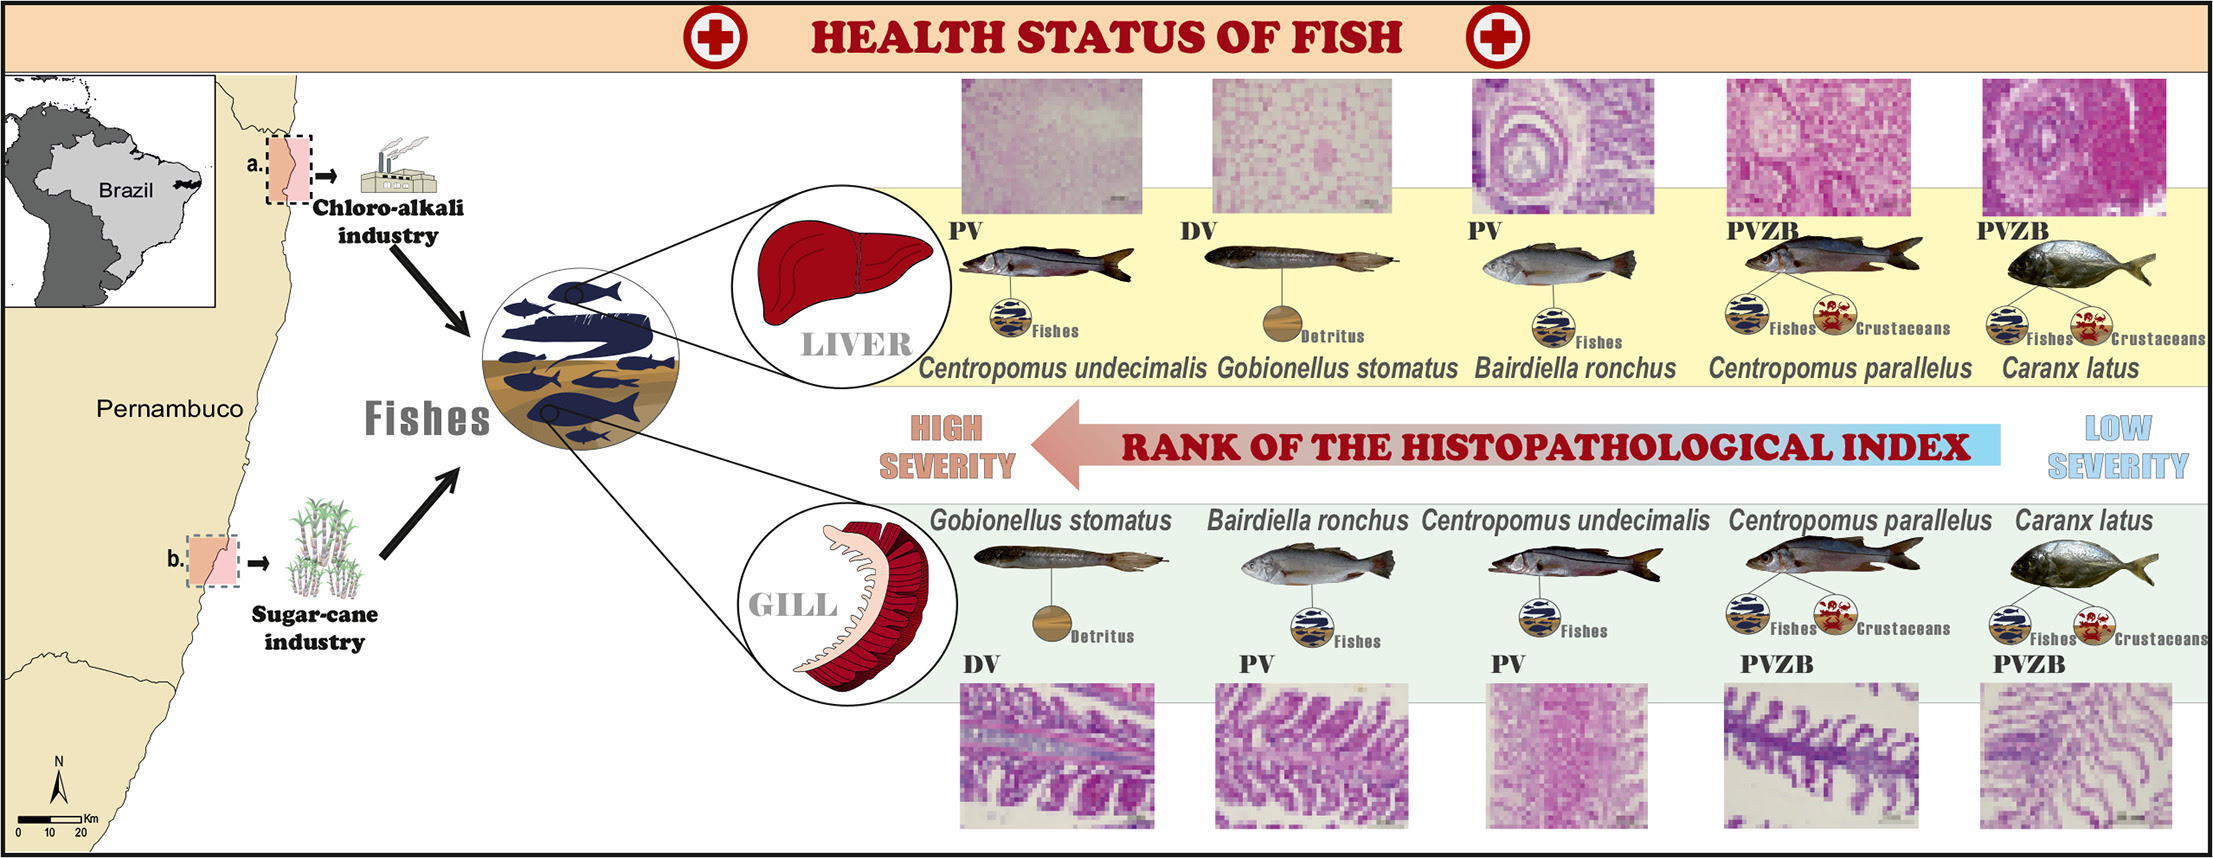 Revealing the environmental pollution of two estuaries through histopathological biomarkers in five fishes from different trophic guilds of northeastern Brazil